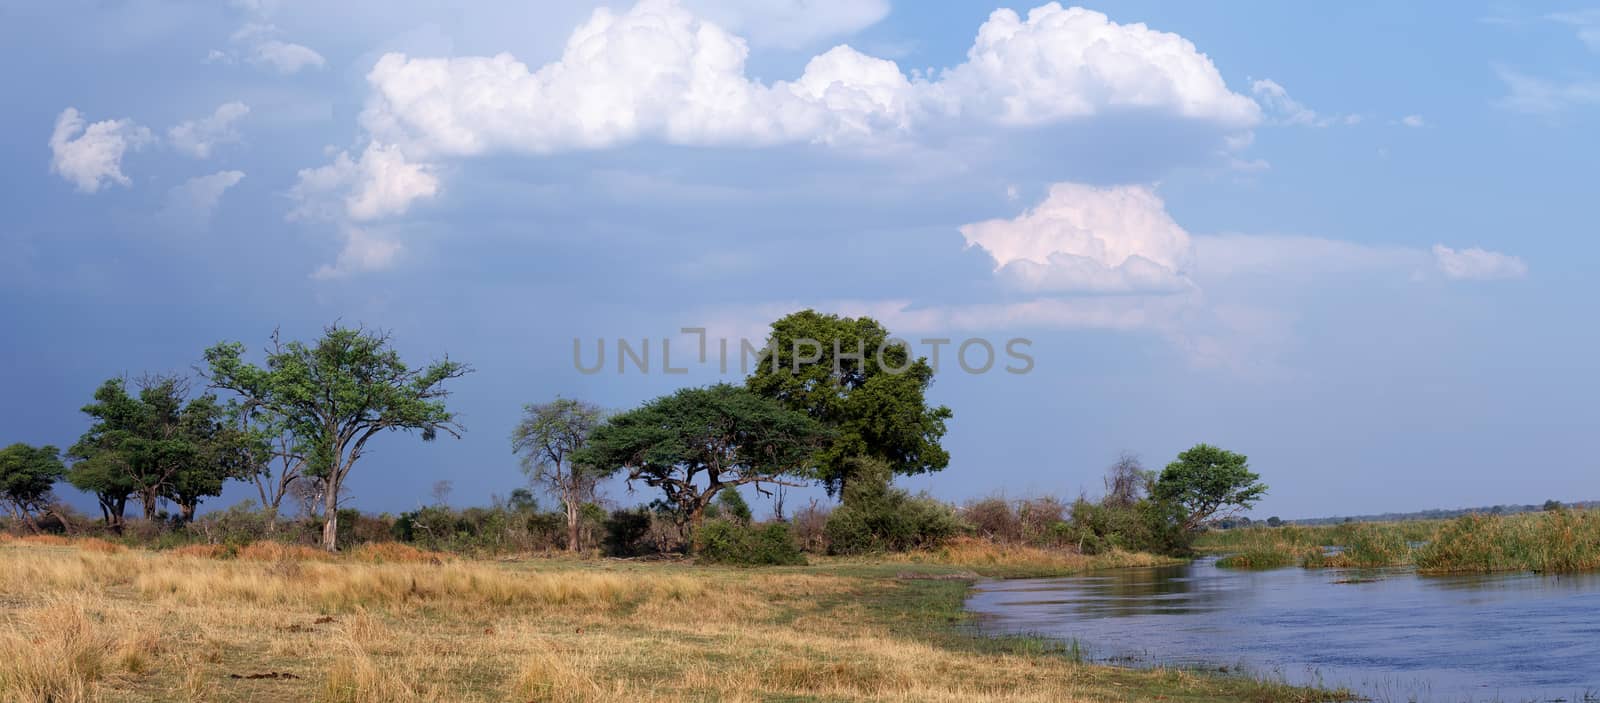 African landscape by artush